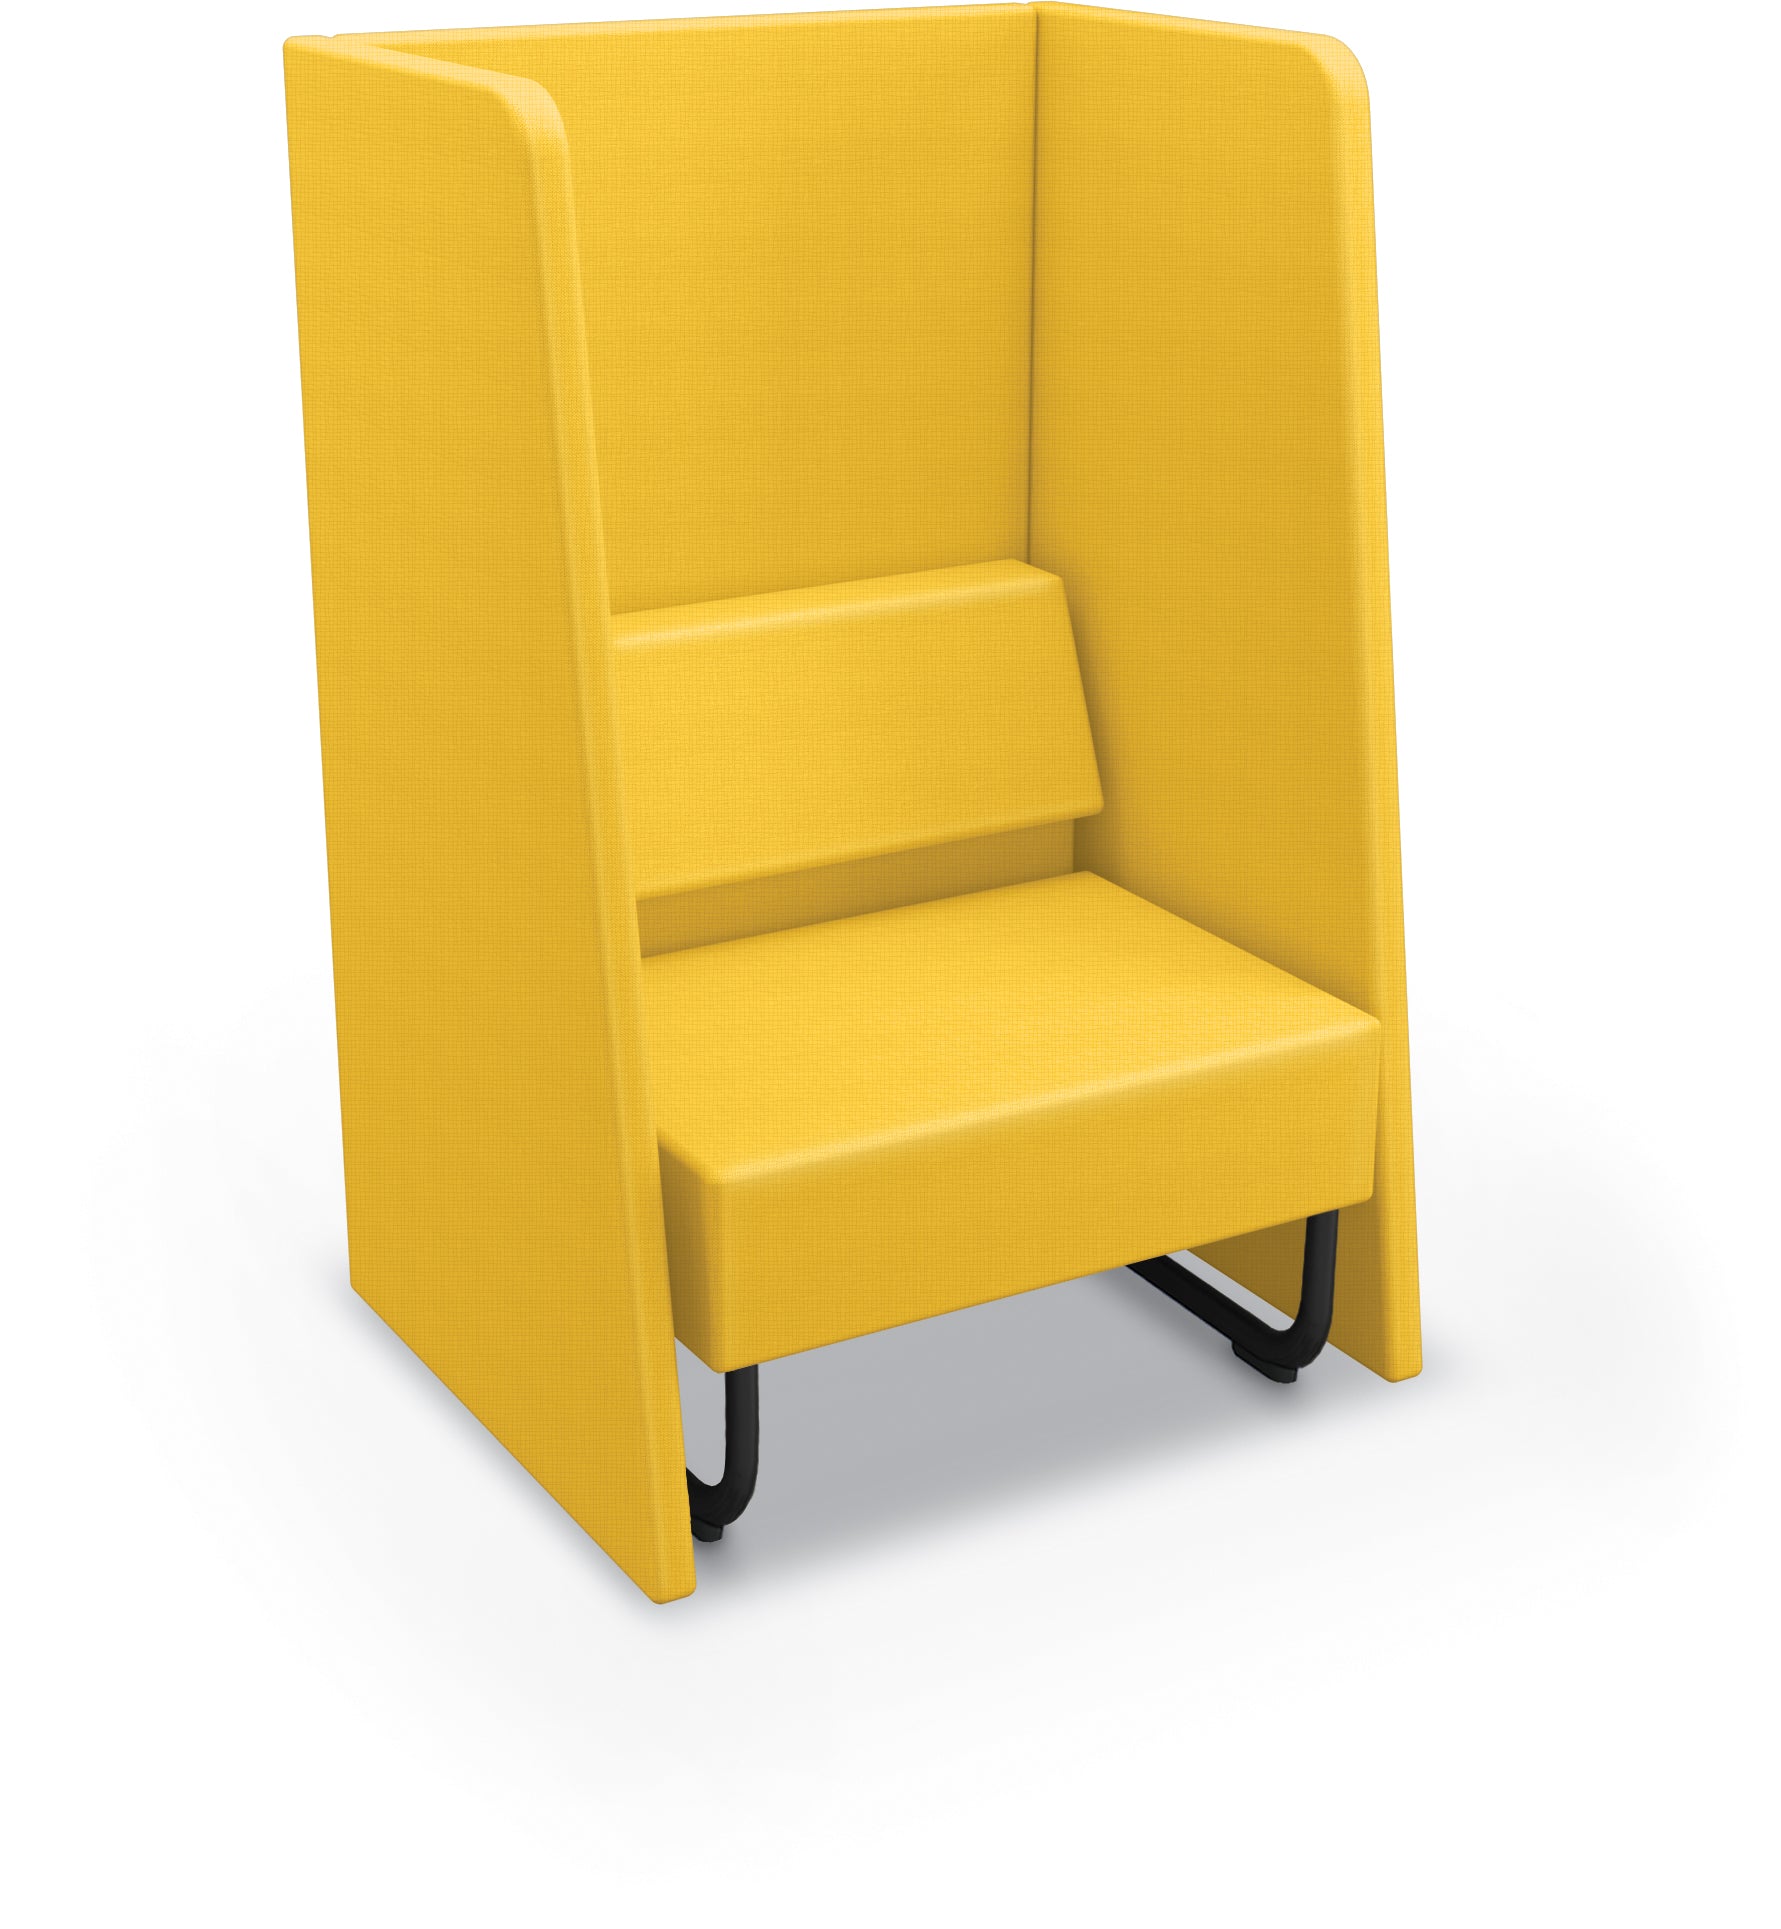 Mooreco Akt Soft Seating Lounge High Back Chair - Grade 02 Fabric and Powder Coated Sled Legs - SchoolOutlet